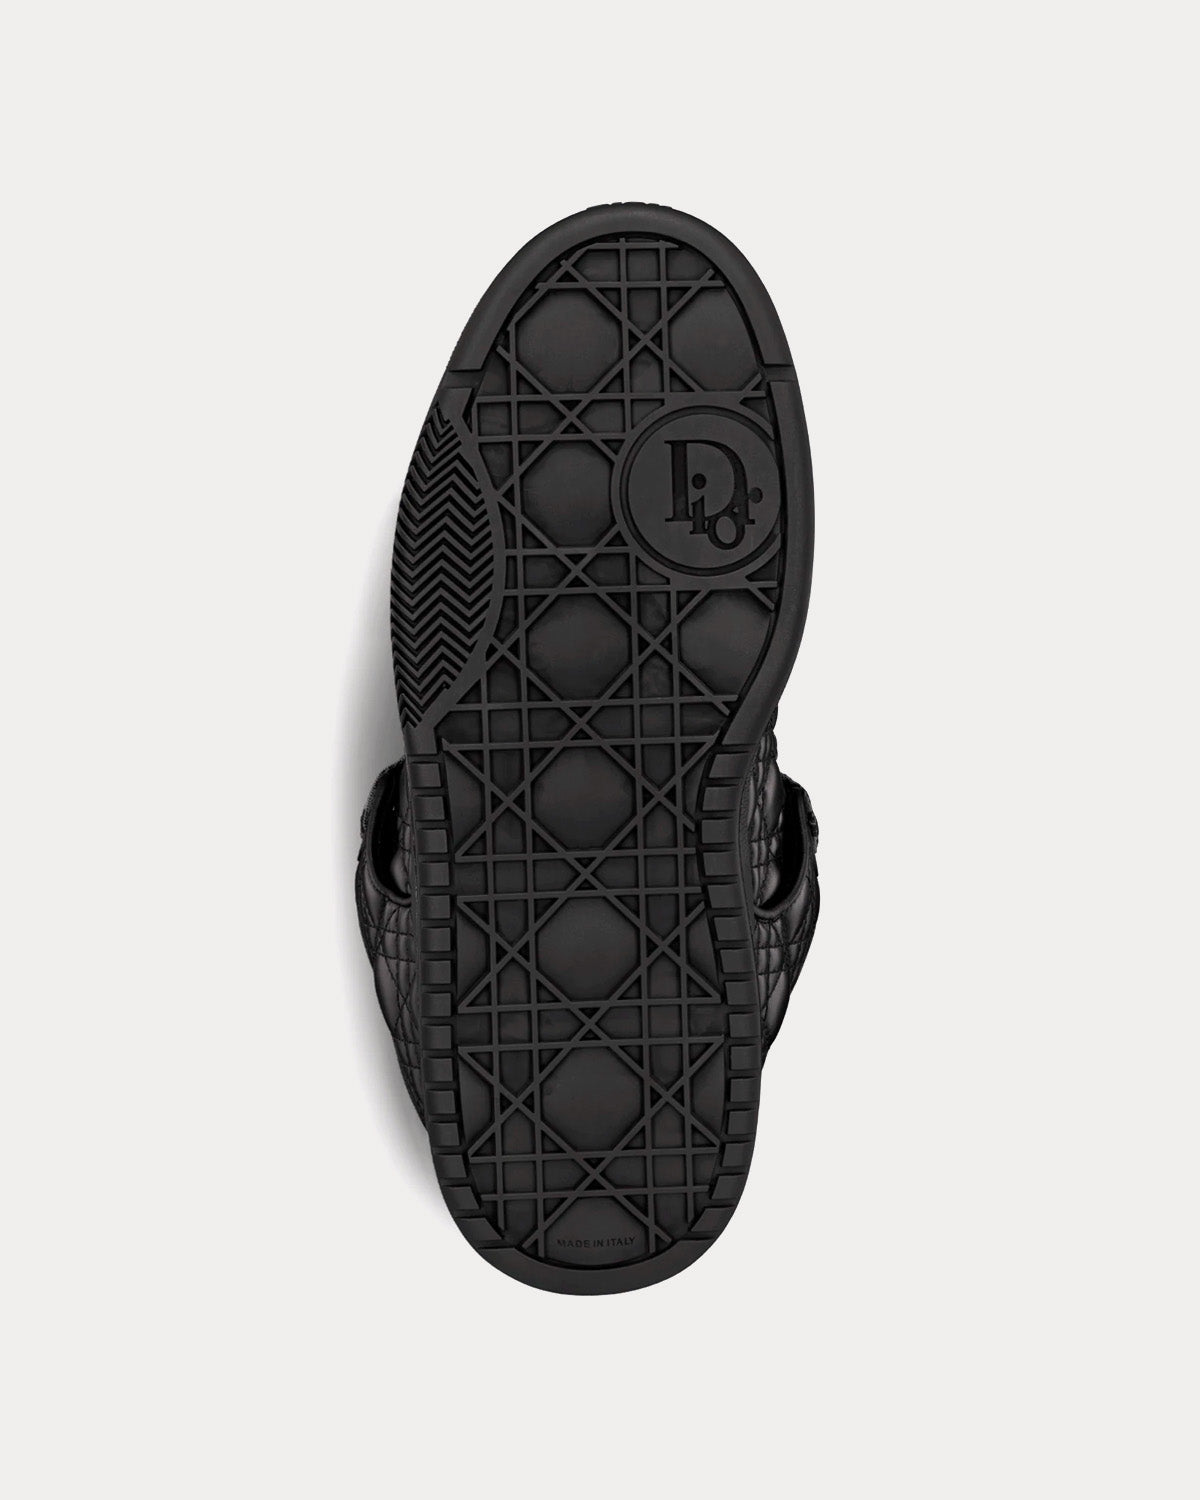 Dior x ERL - B9S Skater Limited And Numbered Edition Black Quilted Cannage Calfskin Low Top Sneakers